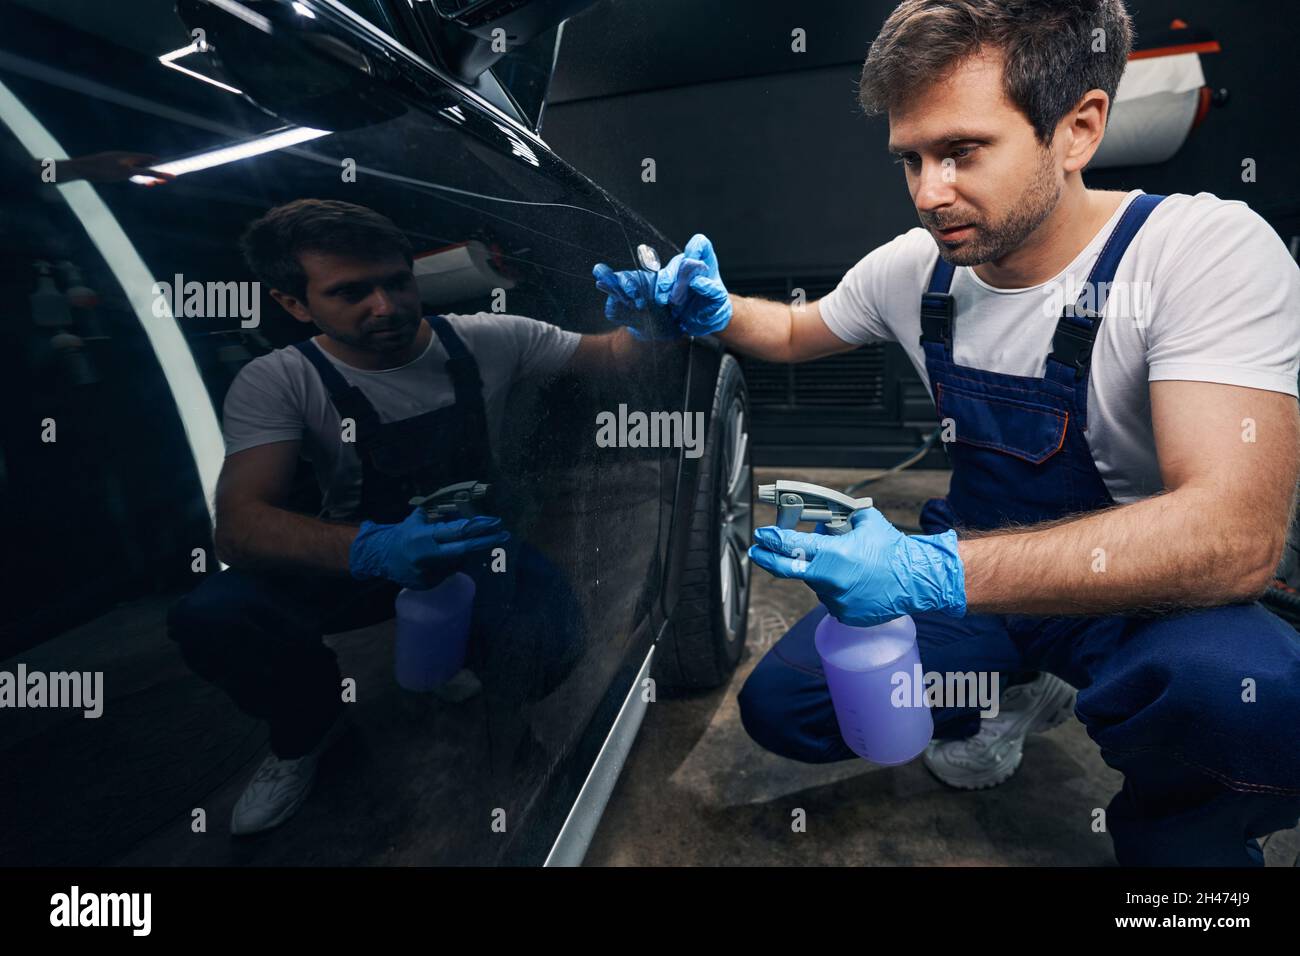 Auto repair shop worker spraying car with degreasing liquid Stock Photo